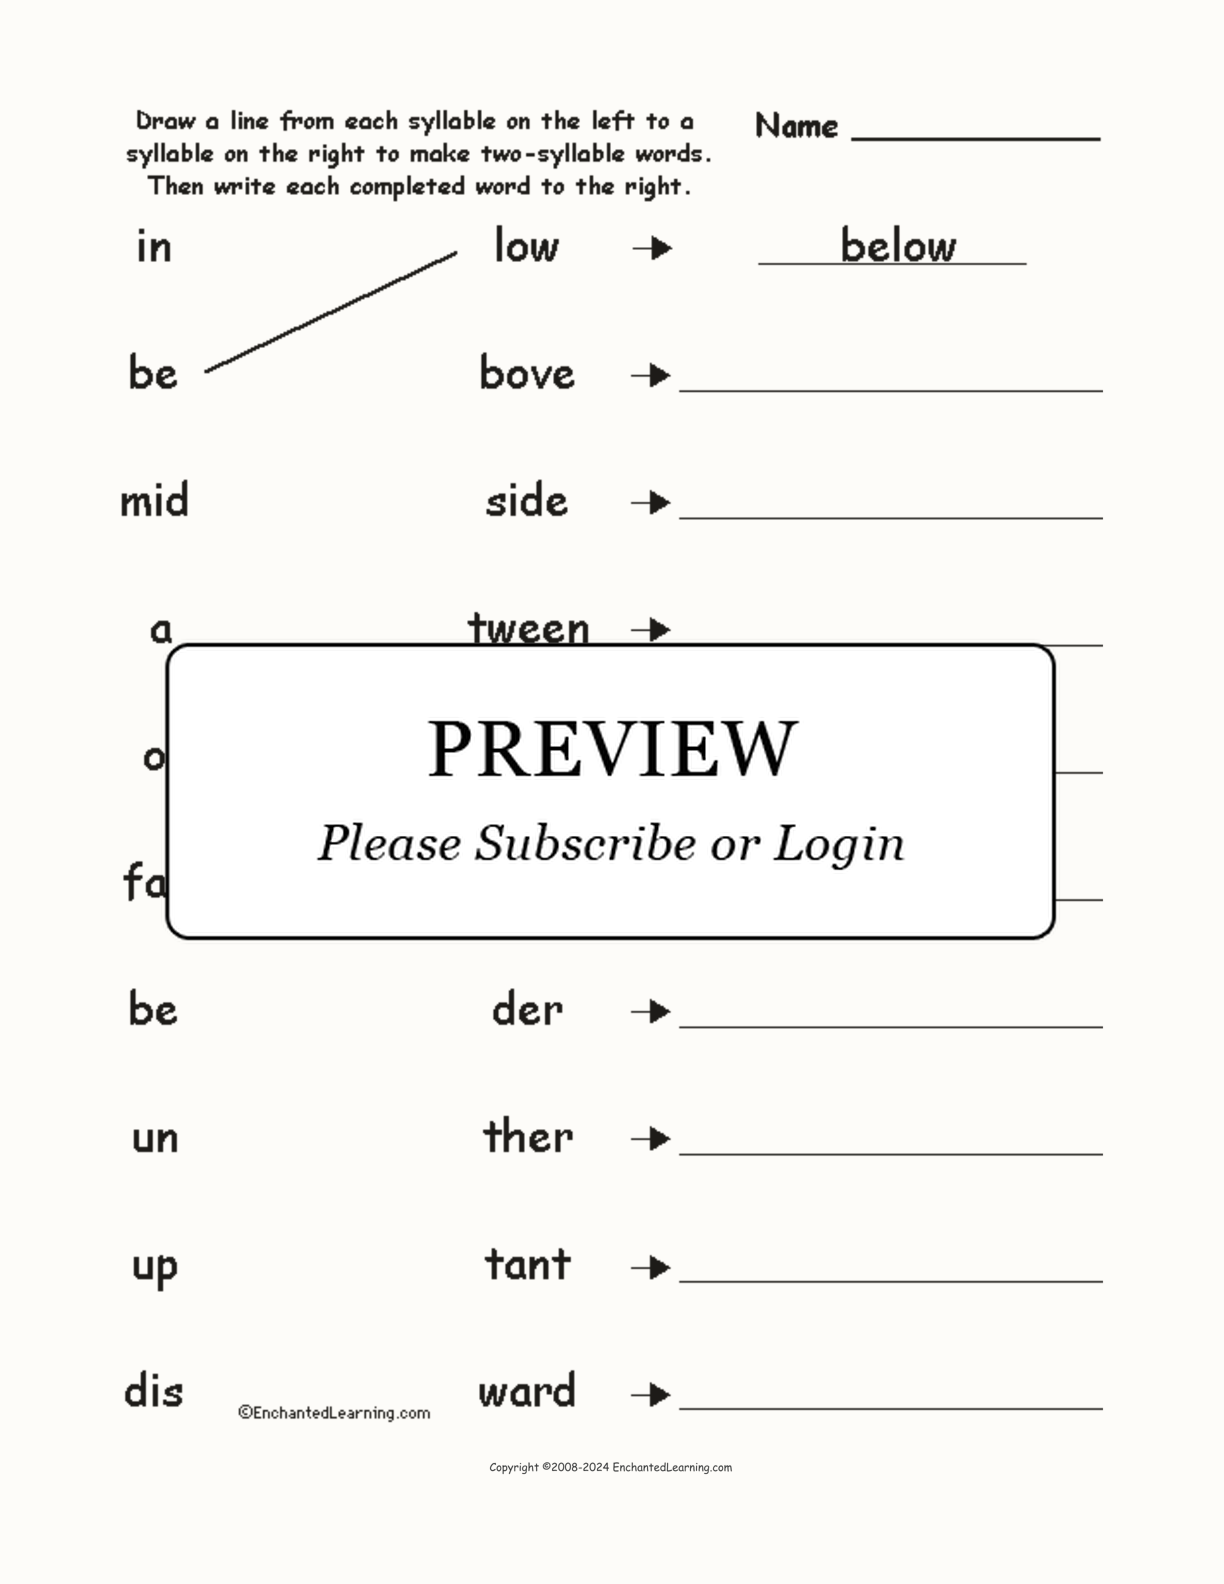 Match the Syllables: Location Words interactive worksheet page 1